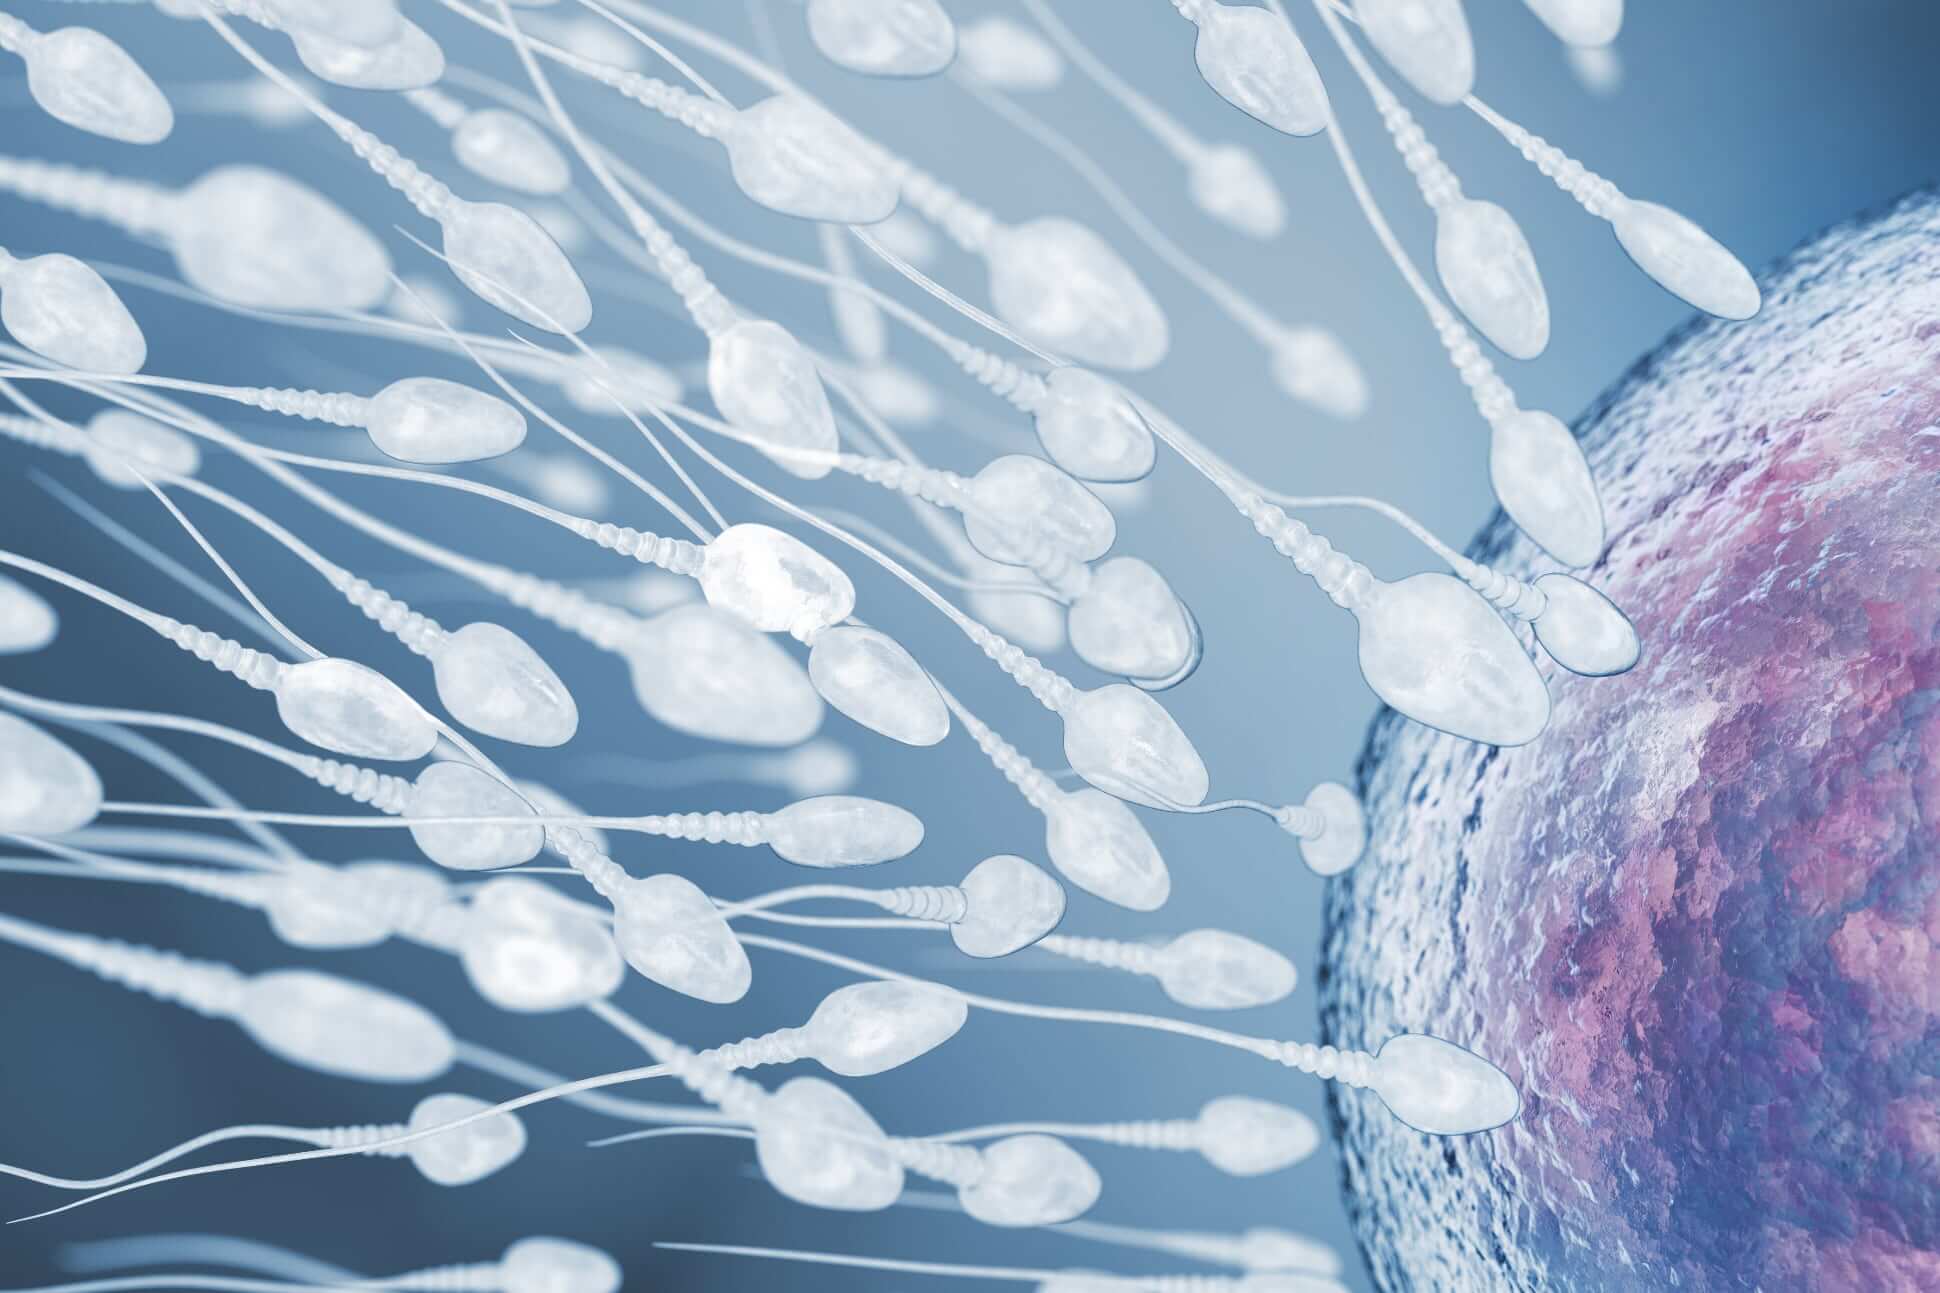 USE OF SOCIAL MEDIA TO FIND SPERM DONORS